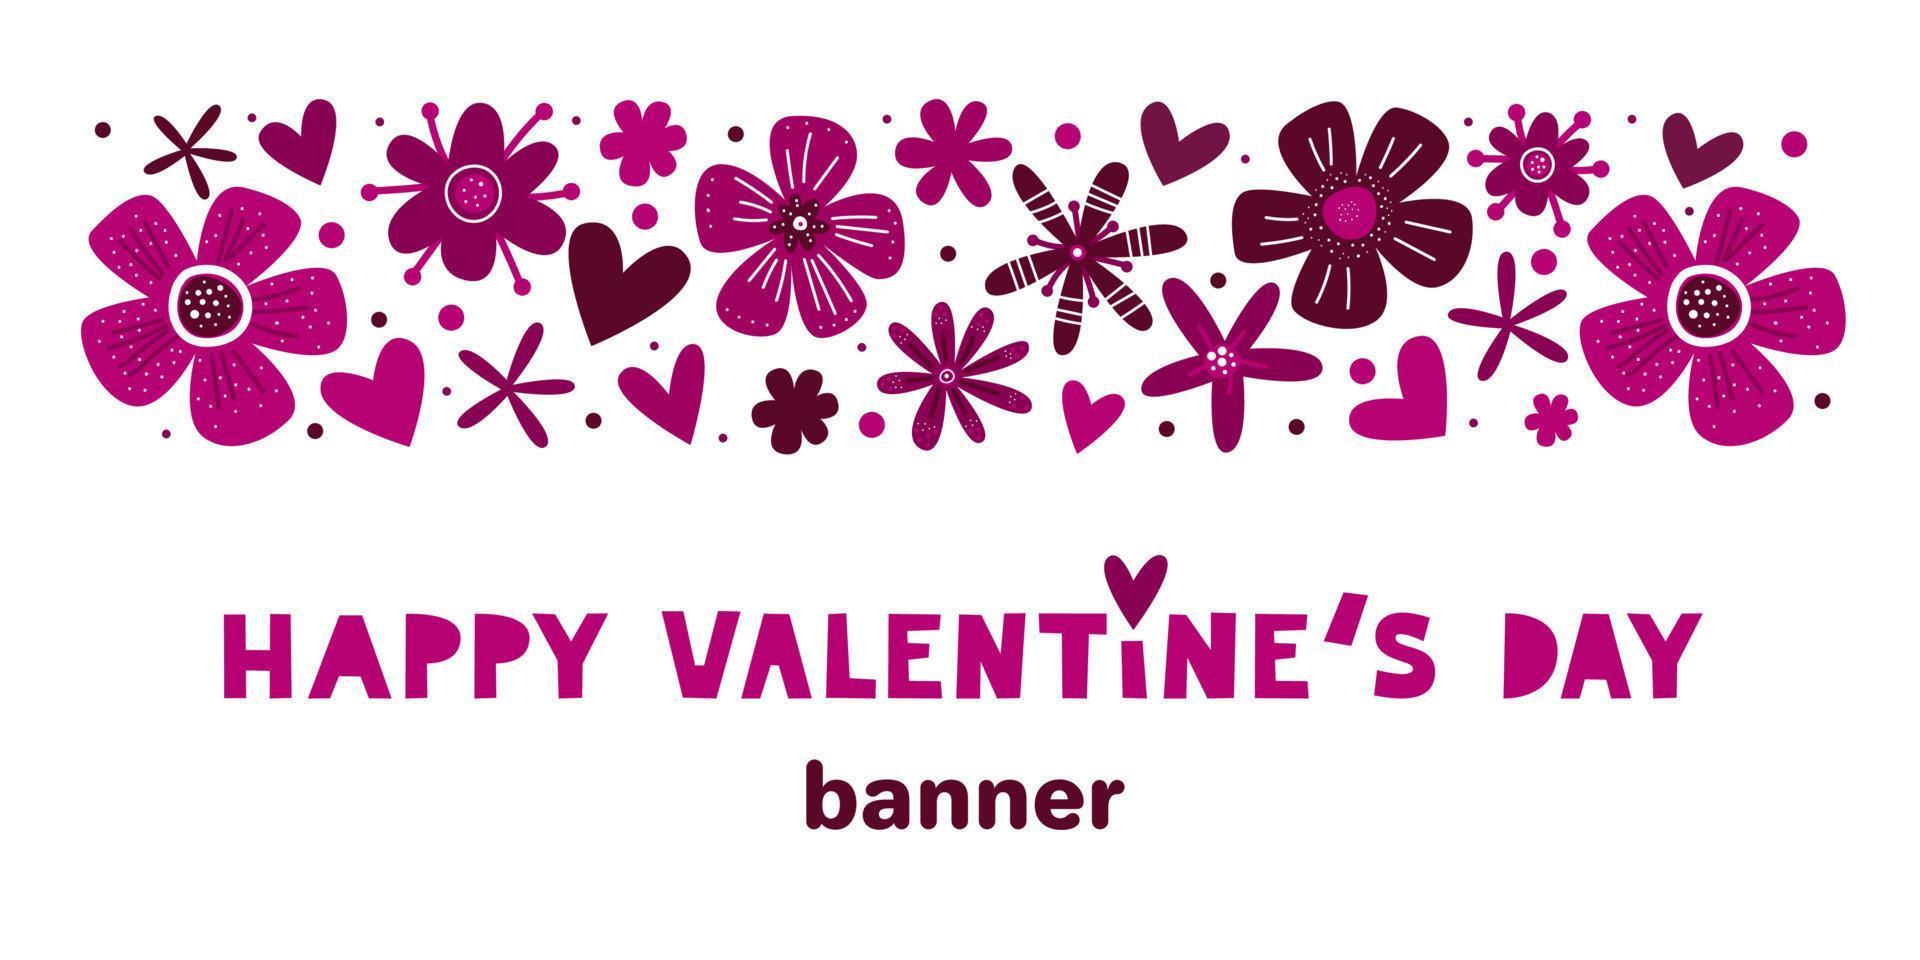 Valentines day romantic banner with love elements. Hearts and flowers garland chain. 14 february holiday. vector